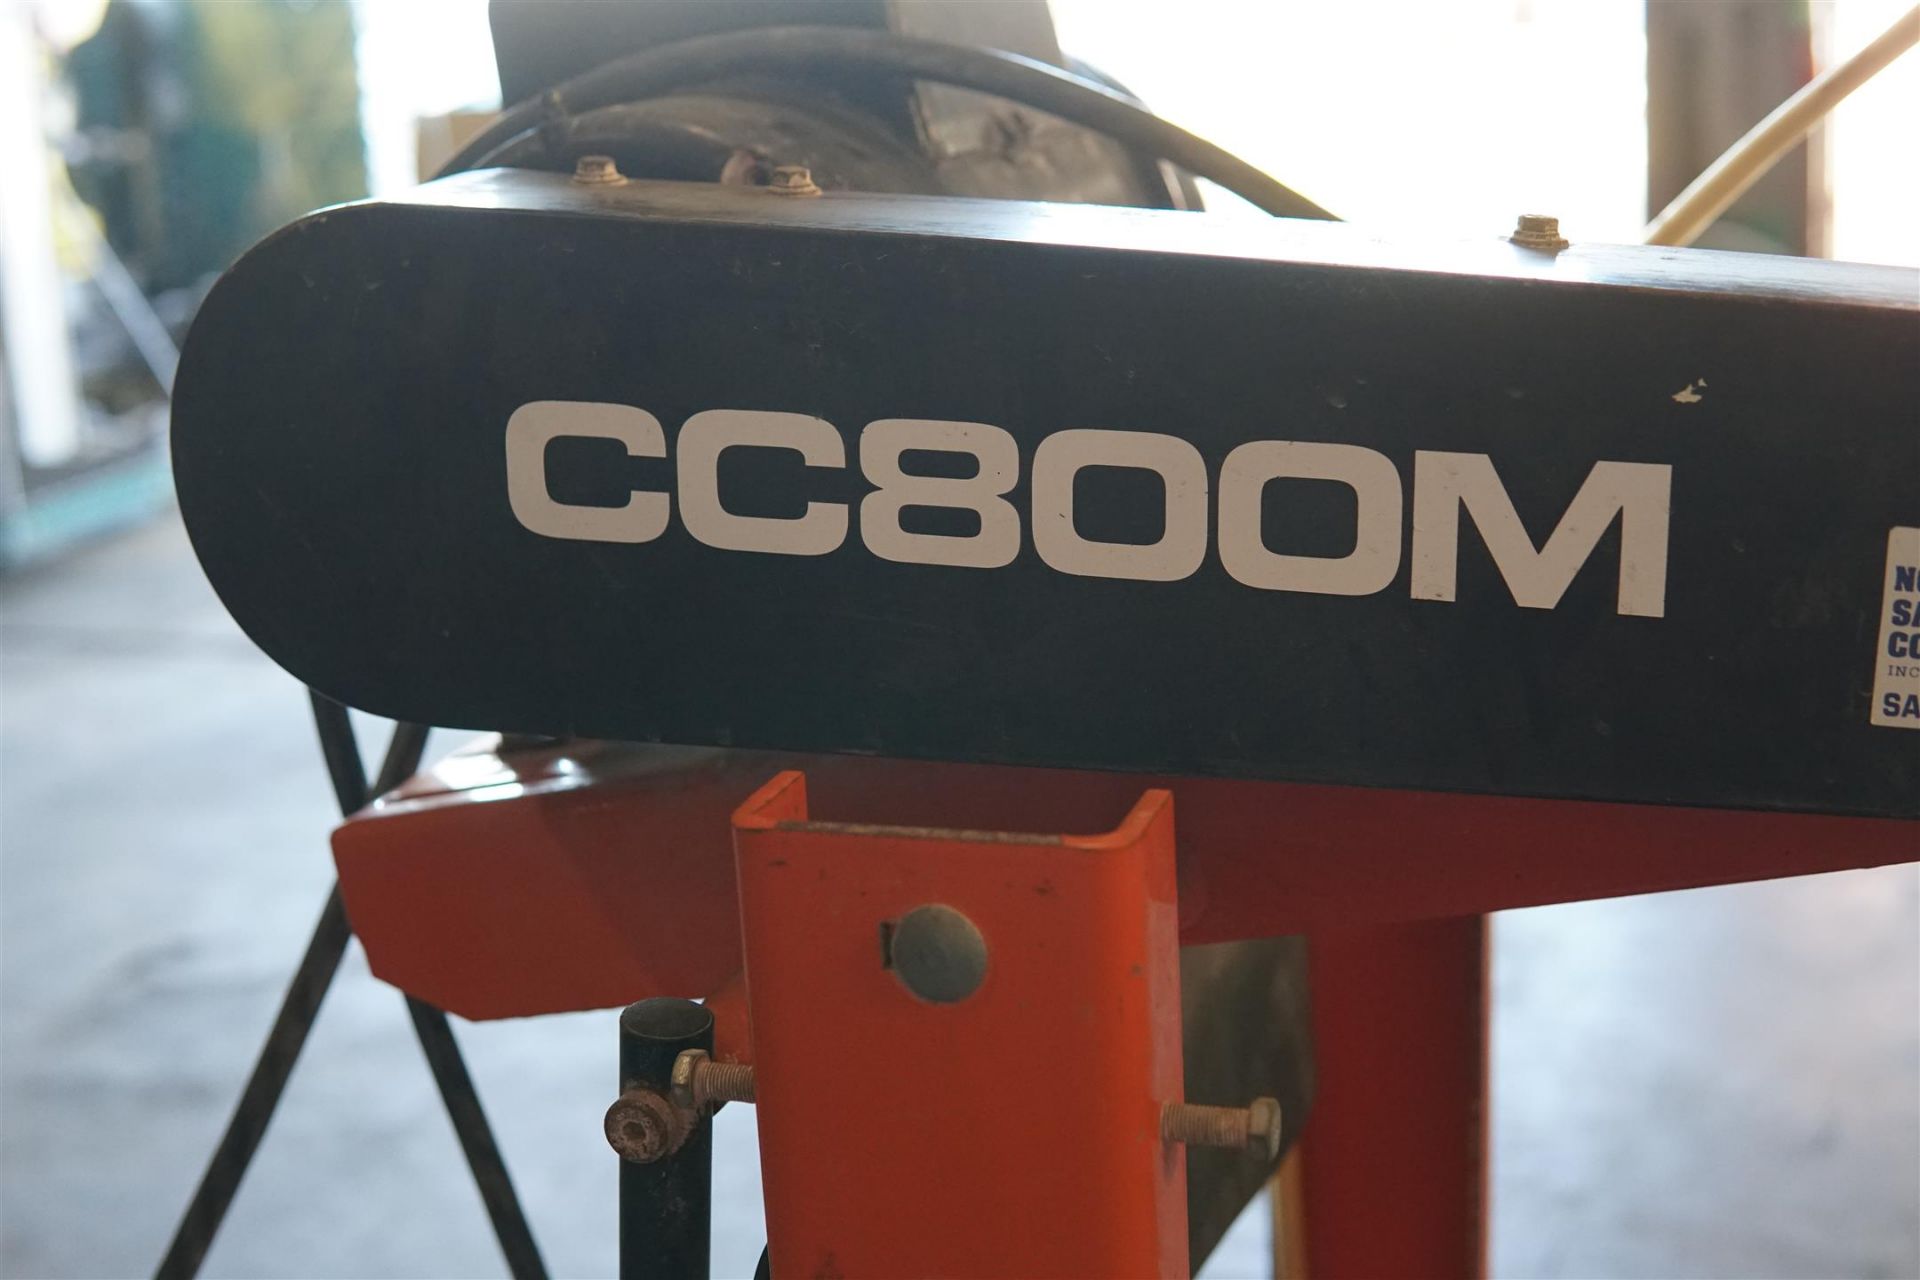 Core Cut CC800M 20 IN. Industrial Tile Saw- (LOADING FEE - $25) - Image 8 of 12